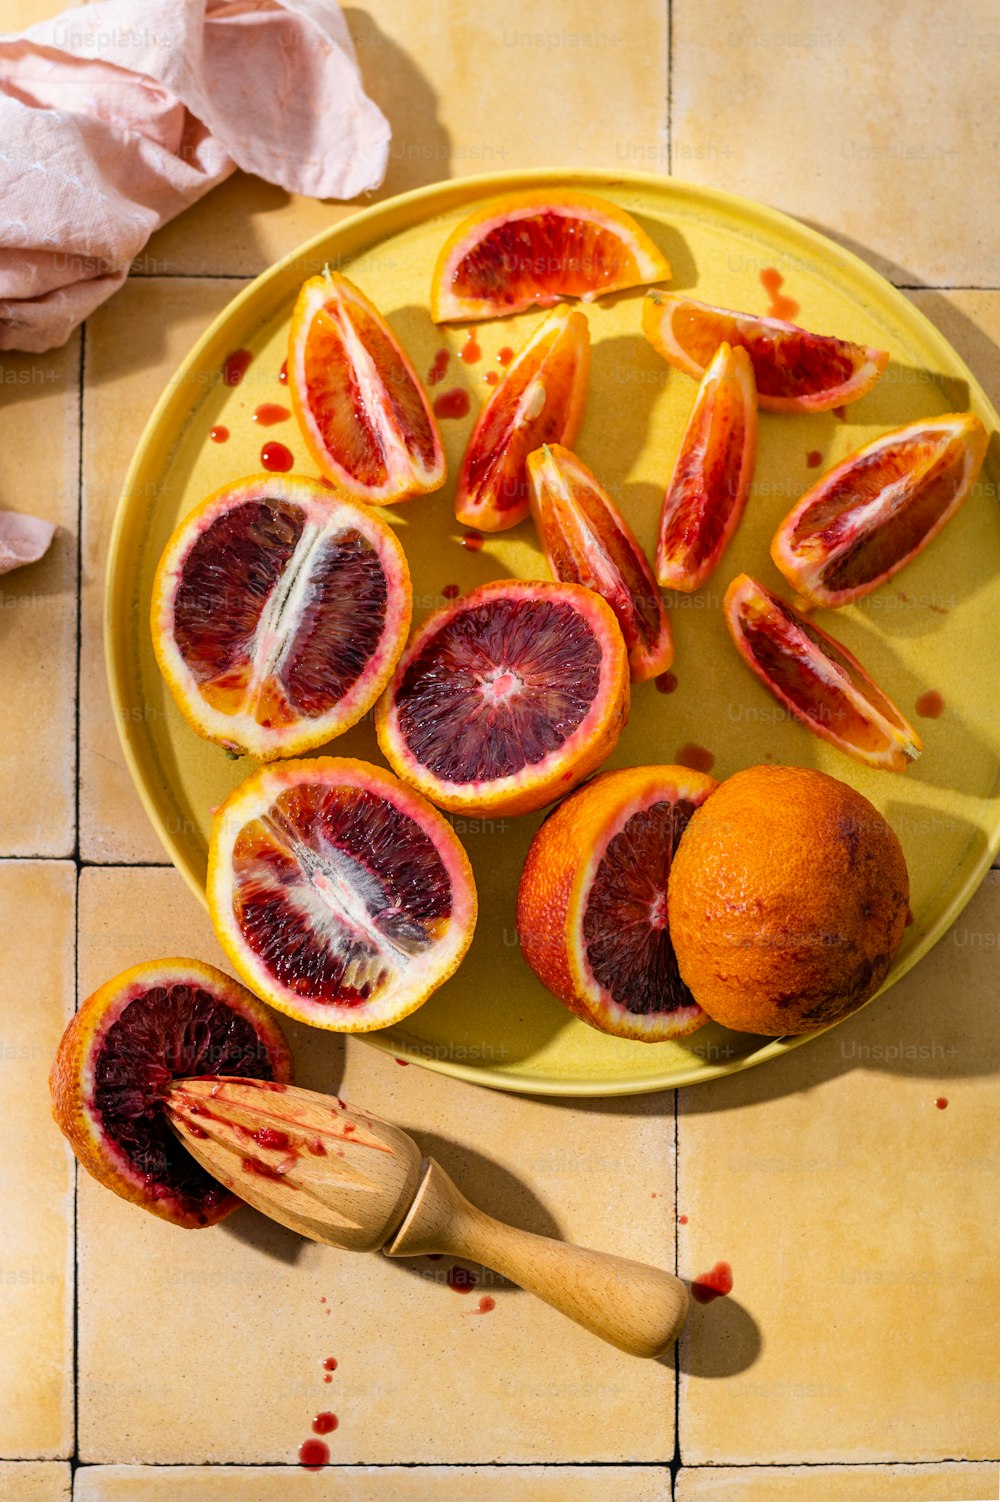 a plate of blood oranges on a table